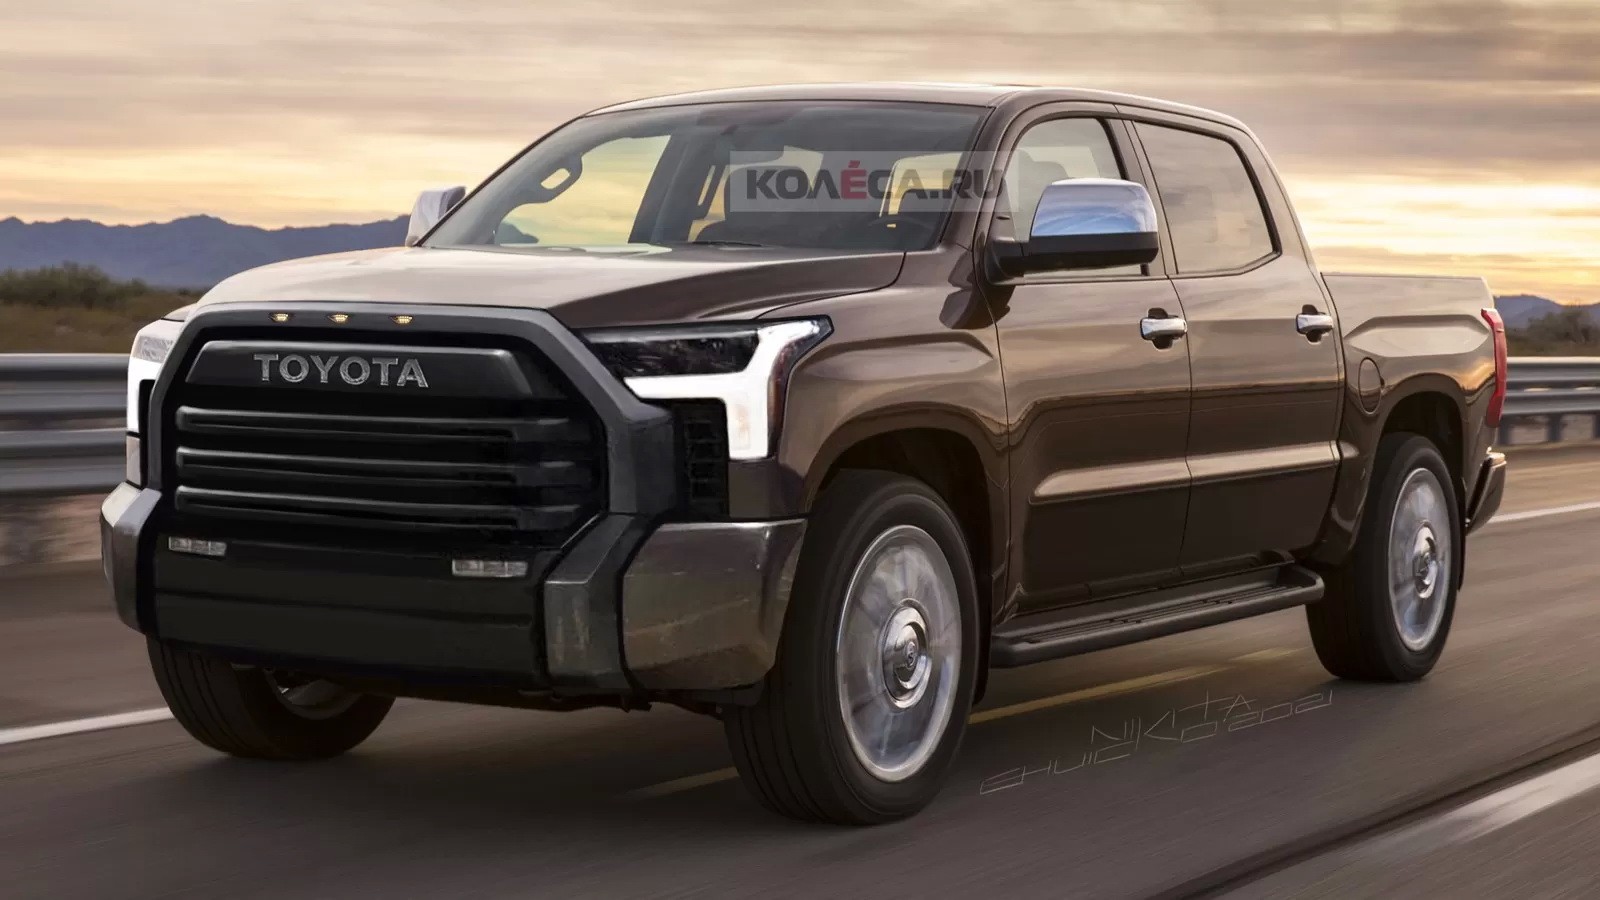 2022 Toyota Tundra V6 Engine Confirmed, It’s Called iForce MAX